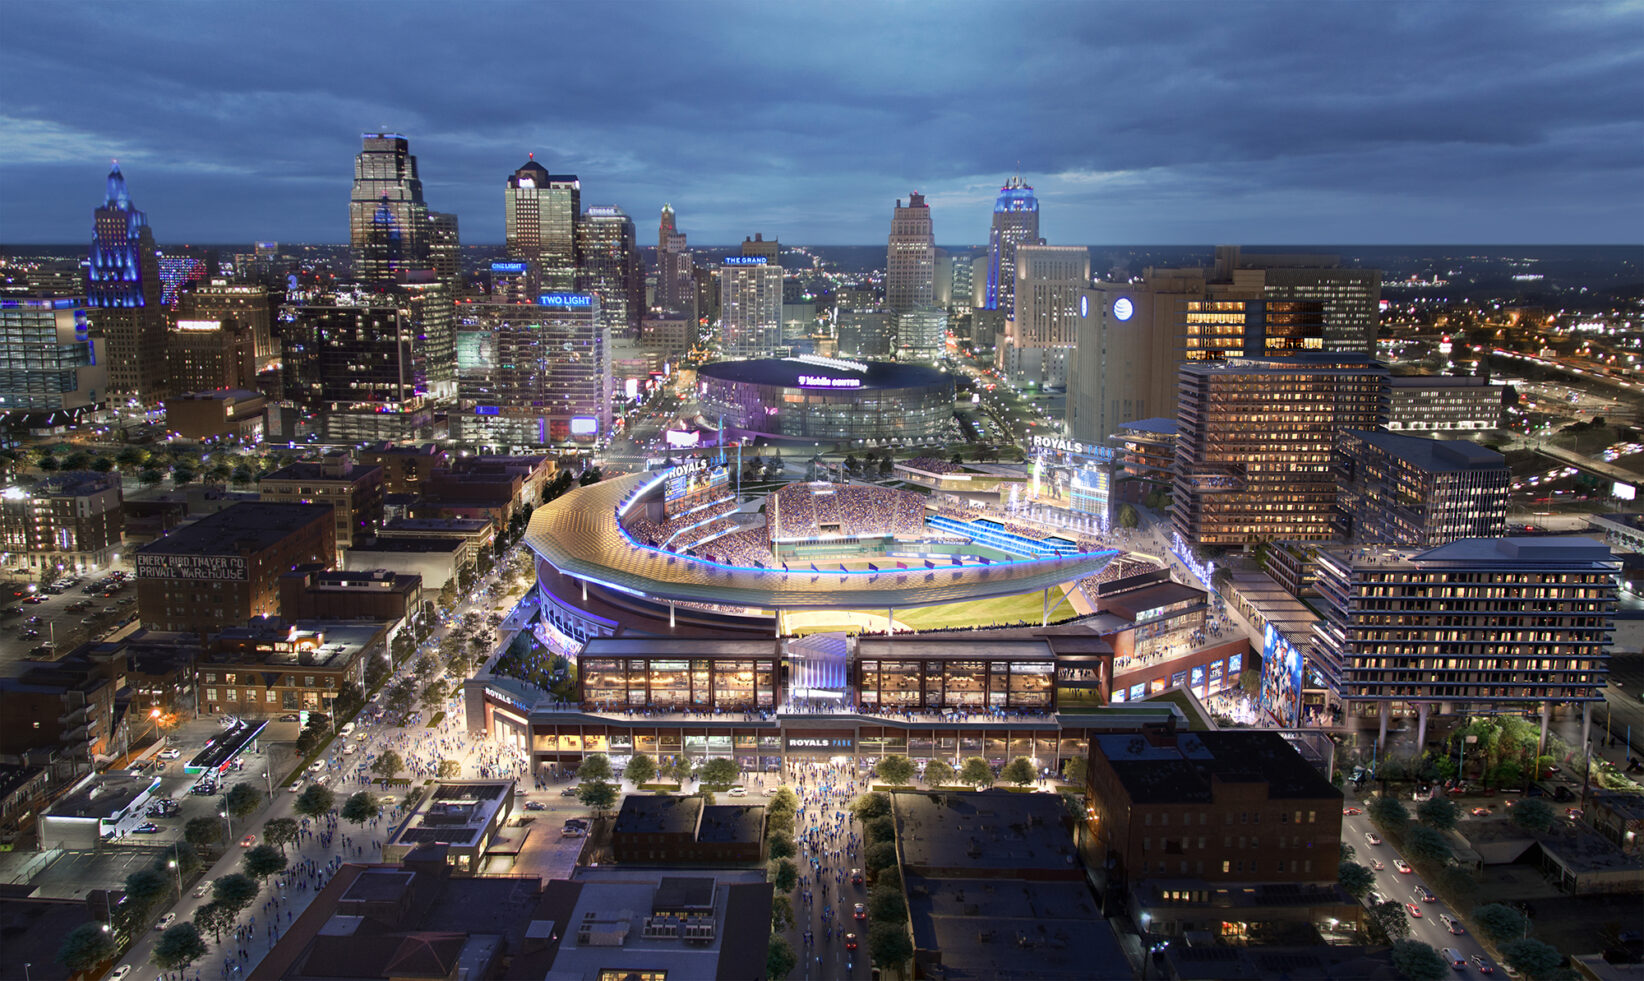 Serial entrepreneur: Why are many small businesses against the new Royals stadium?